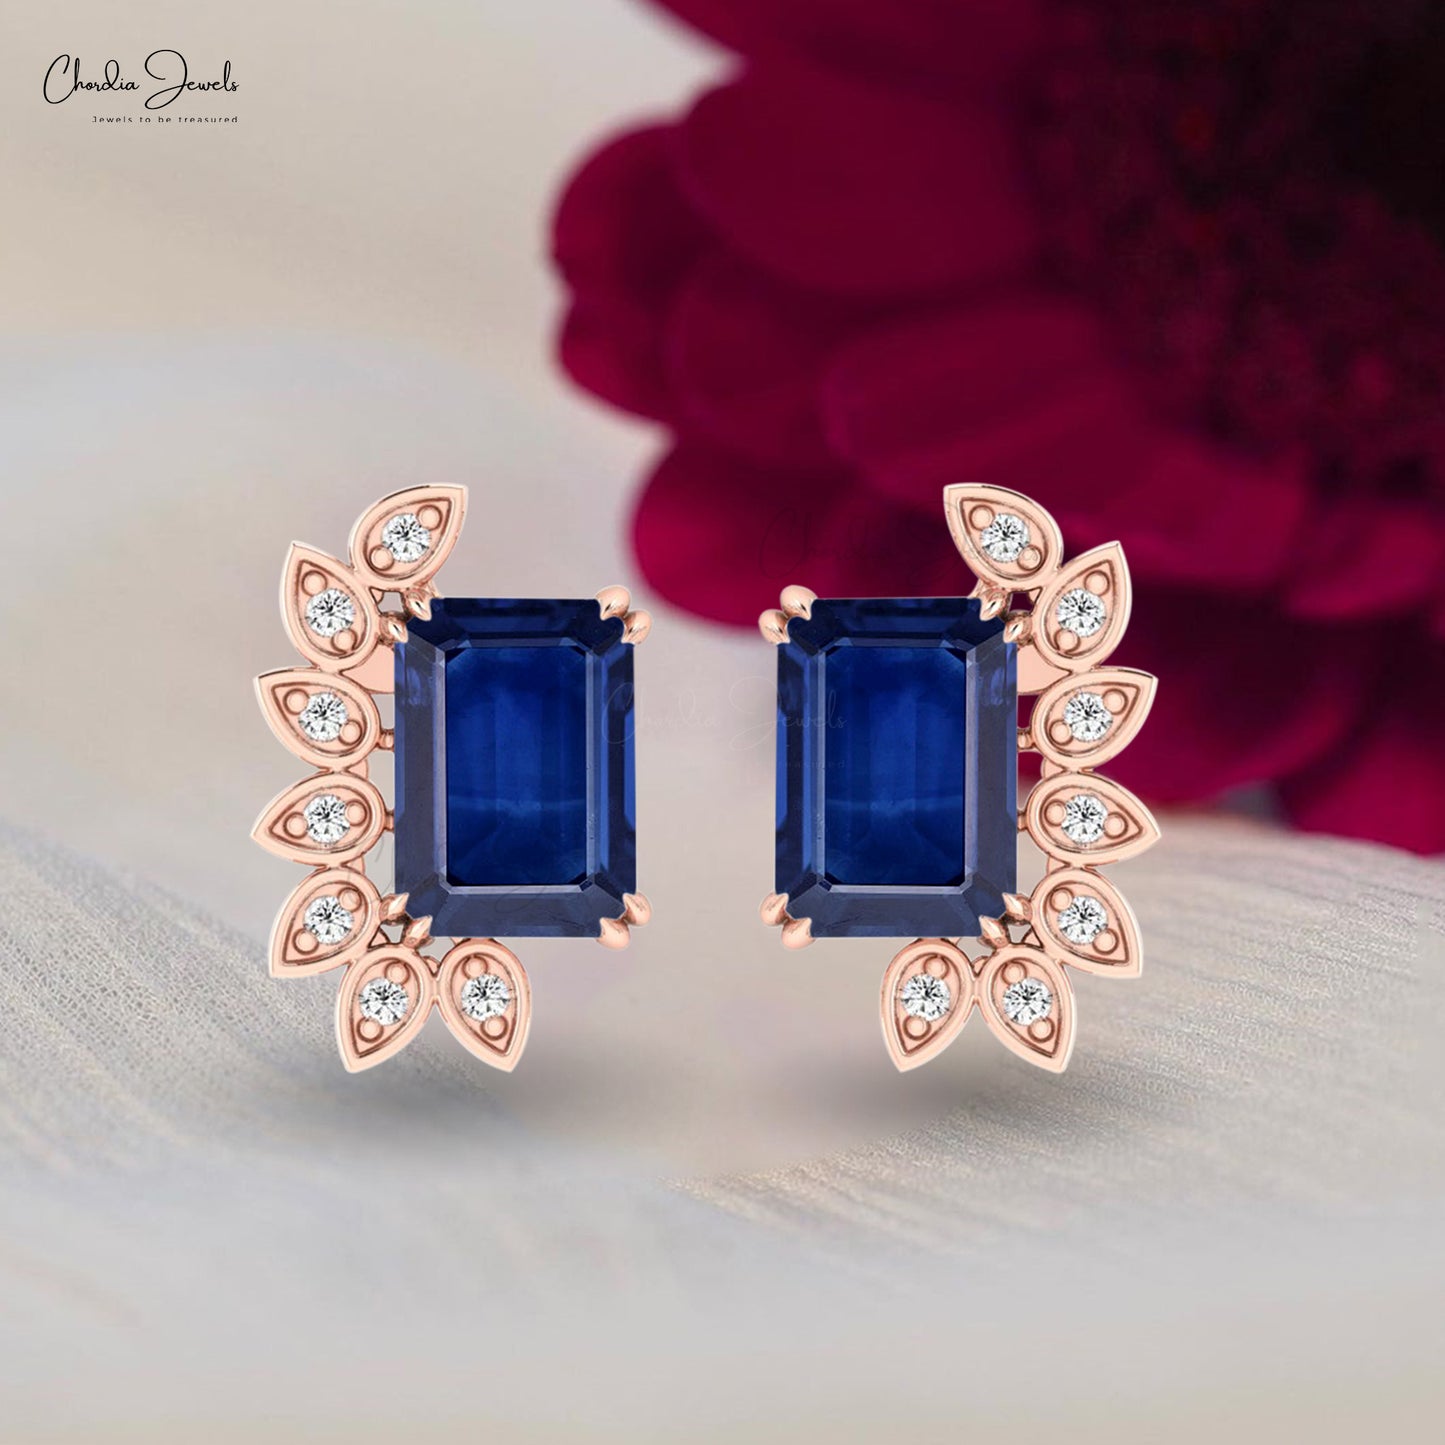 Statement Earrings With Blue Sapphire Gemstone 14k Solid Gold Diamond Accents Stud Earring